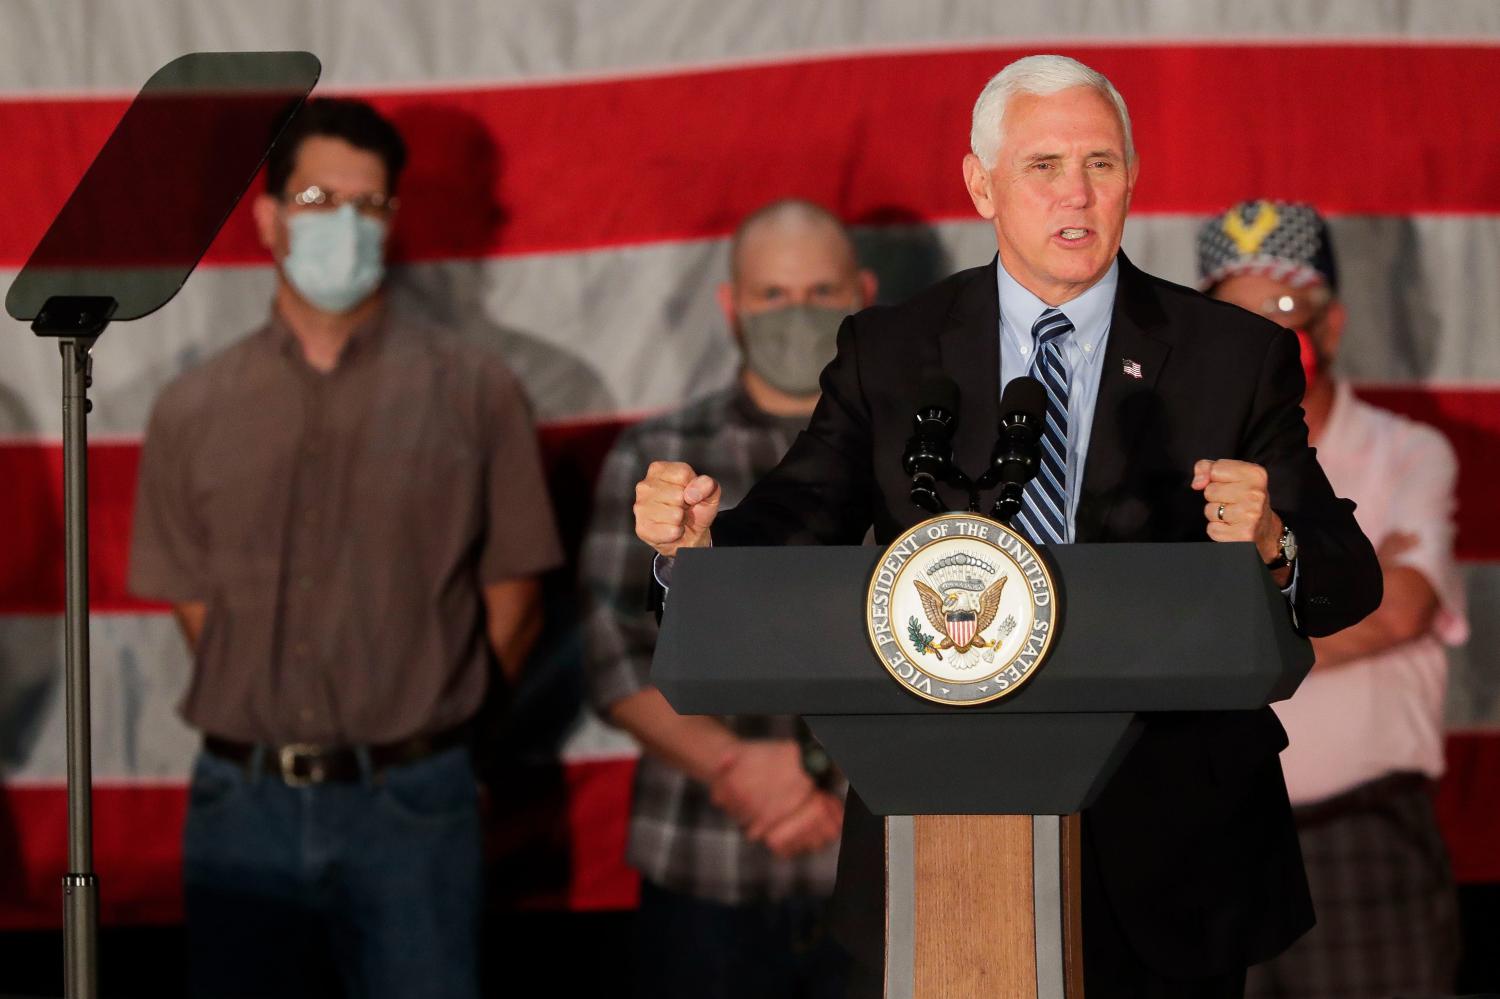 Vice President Mike Pence addresses supporters on Thursday, Sept. 24, 2020, at Midwest Manufacturing in Eau Claire, Wis. Pence toured the facility and addressed supporters as part of a "Made in America" event stressing the importance of the American manufacturing industry.MJS-pence25p1